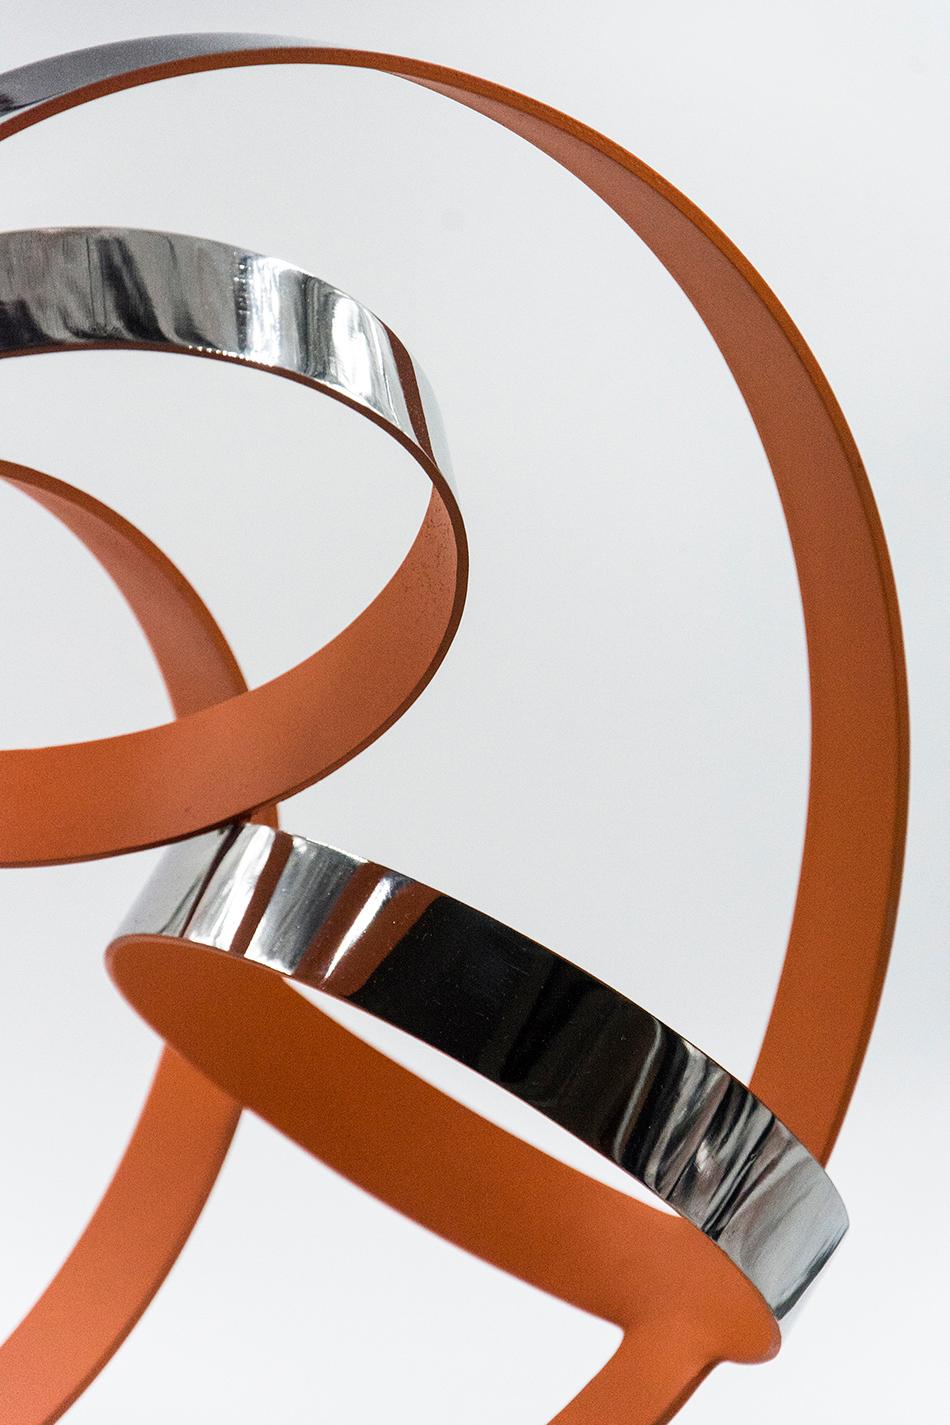 Four Ring Temps Zero Orange - bright, modern, abstract stainless steel sculpture 1